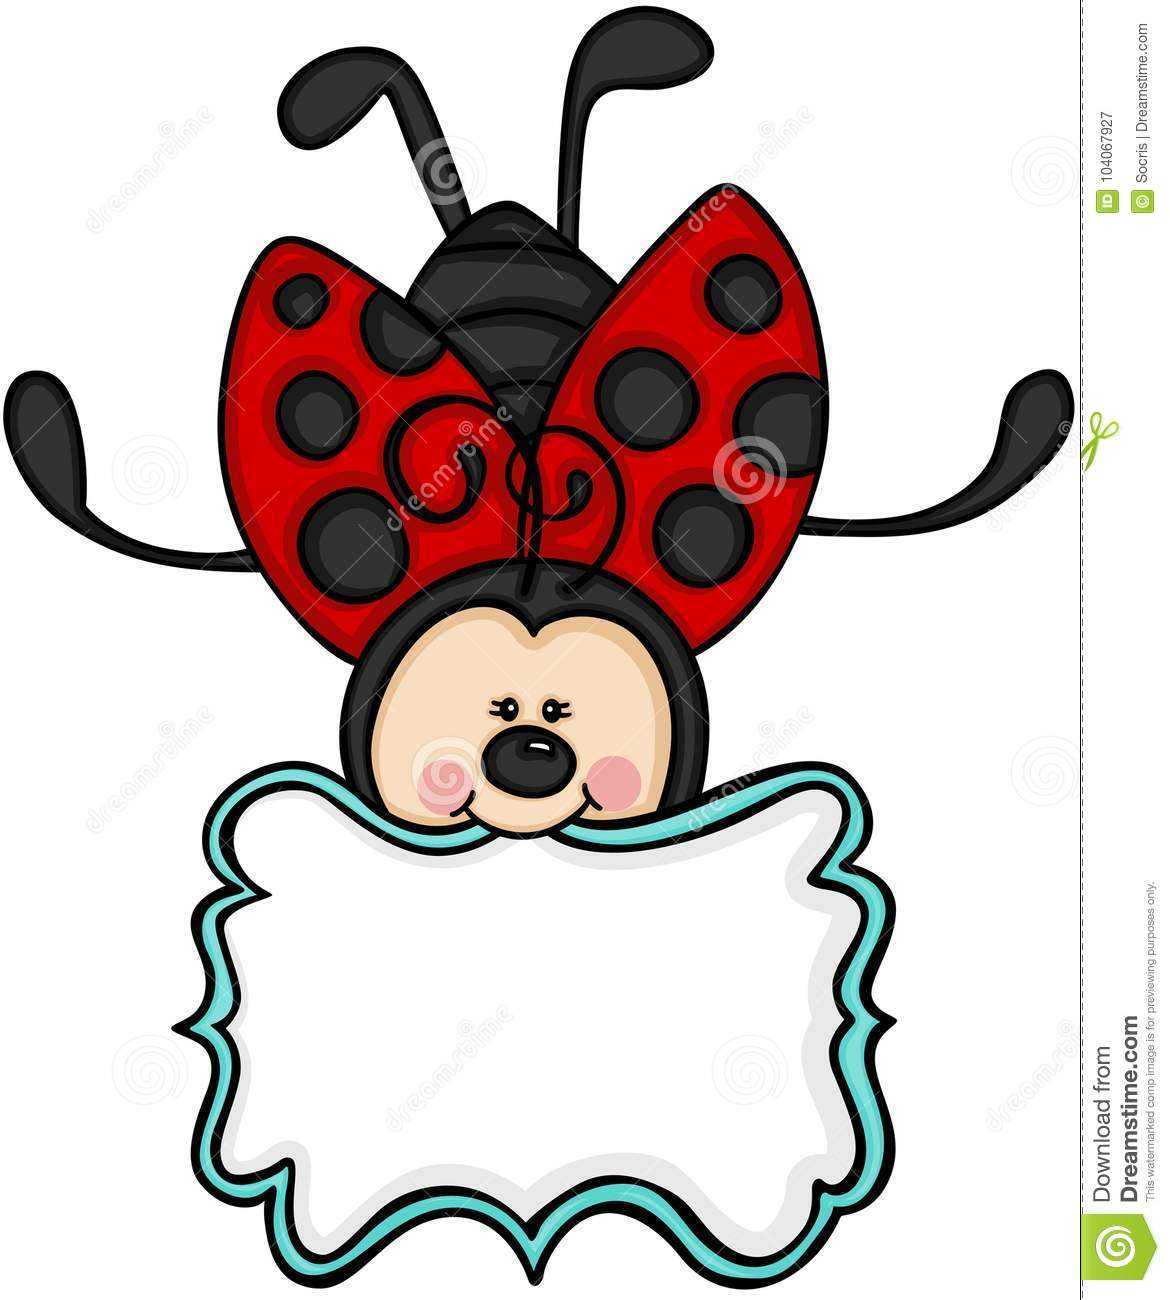 Cute Ladybug With Blank Label Sticker Stock Vector For Blank Ladybug Template